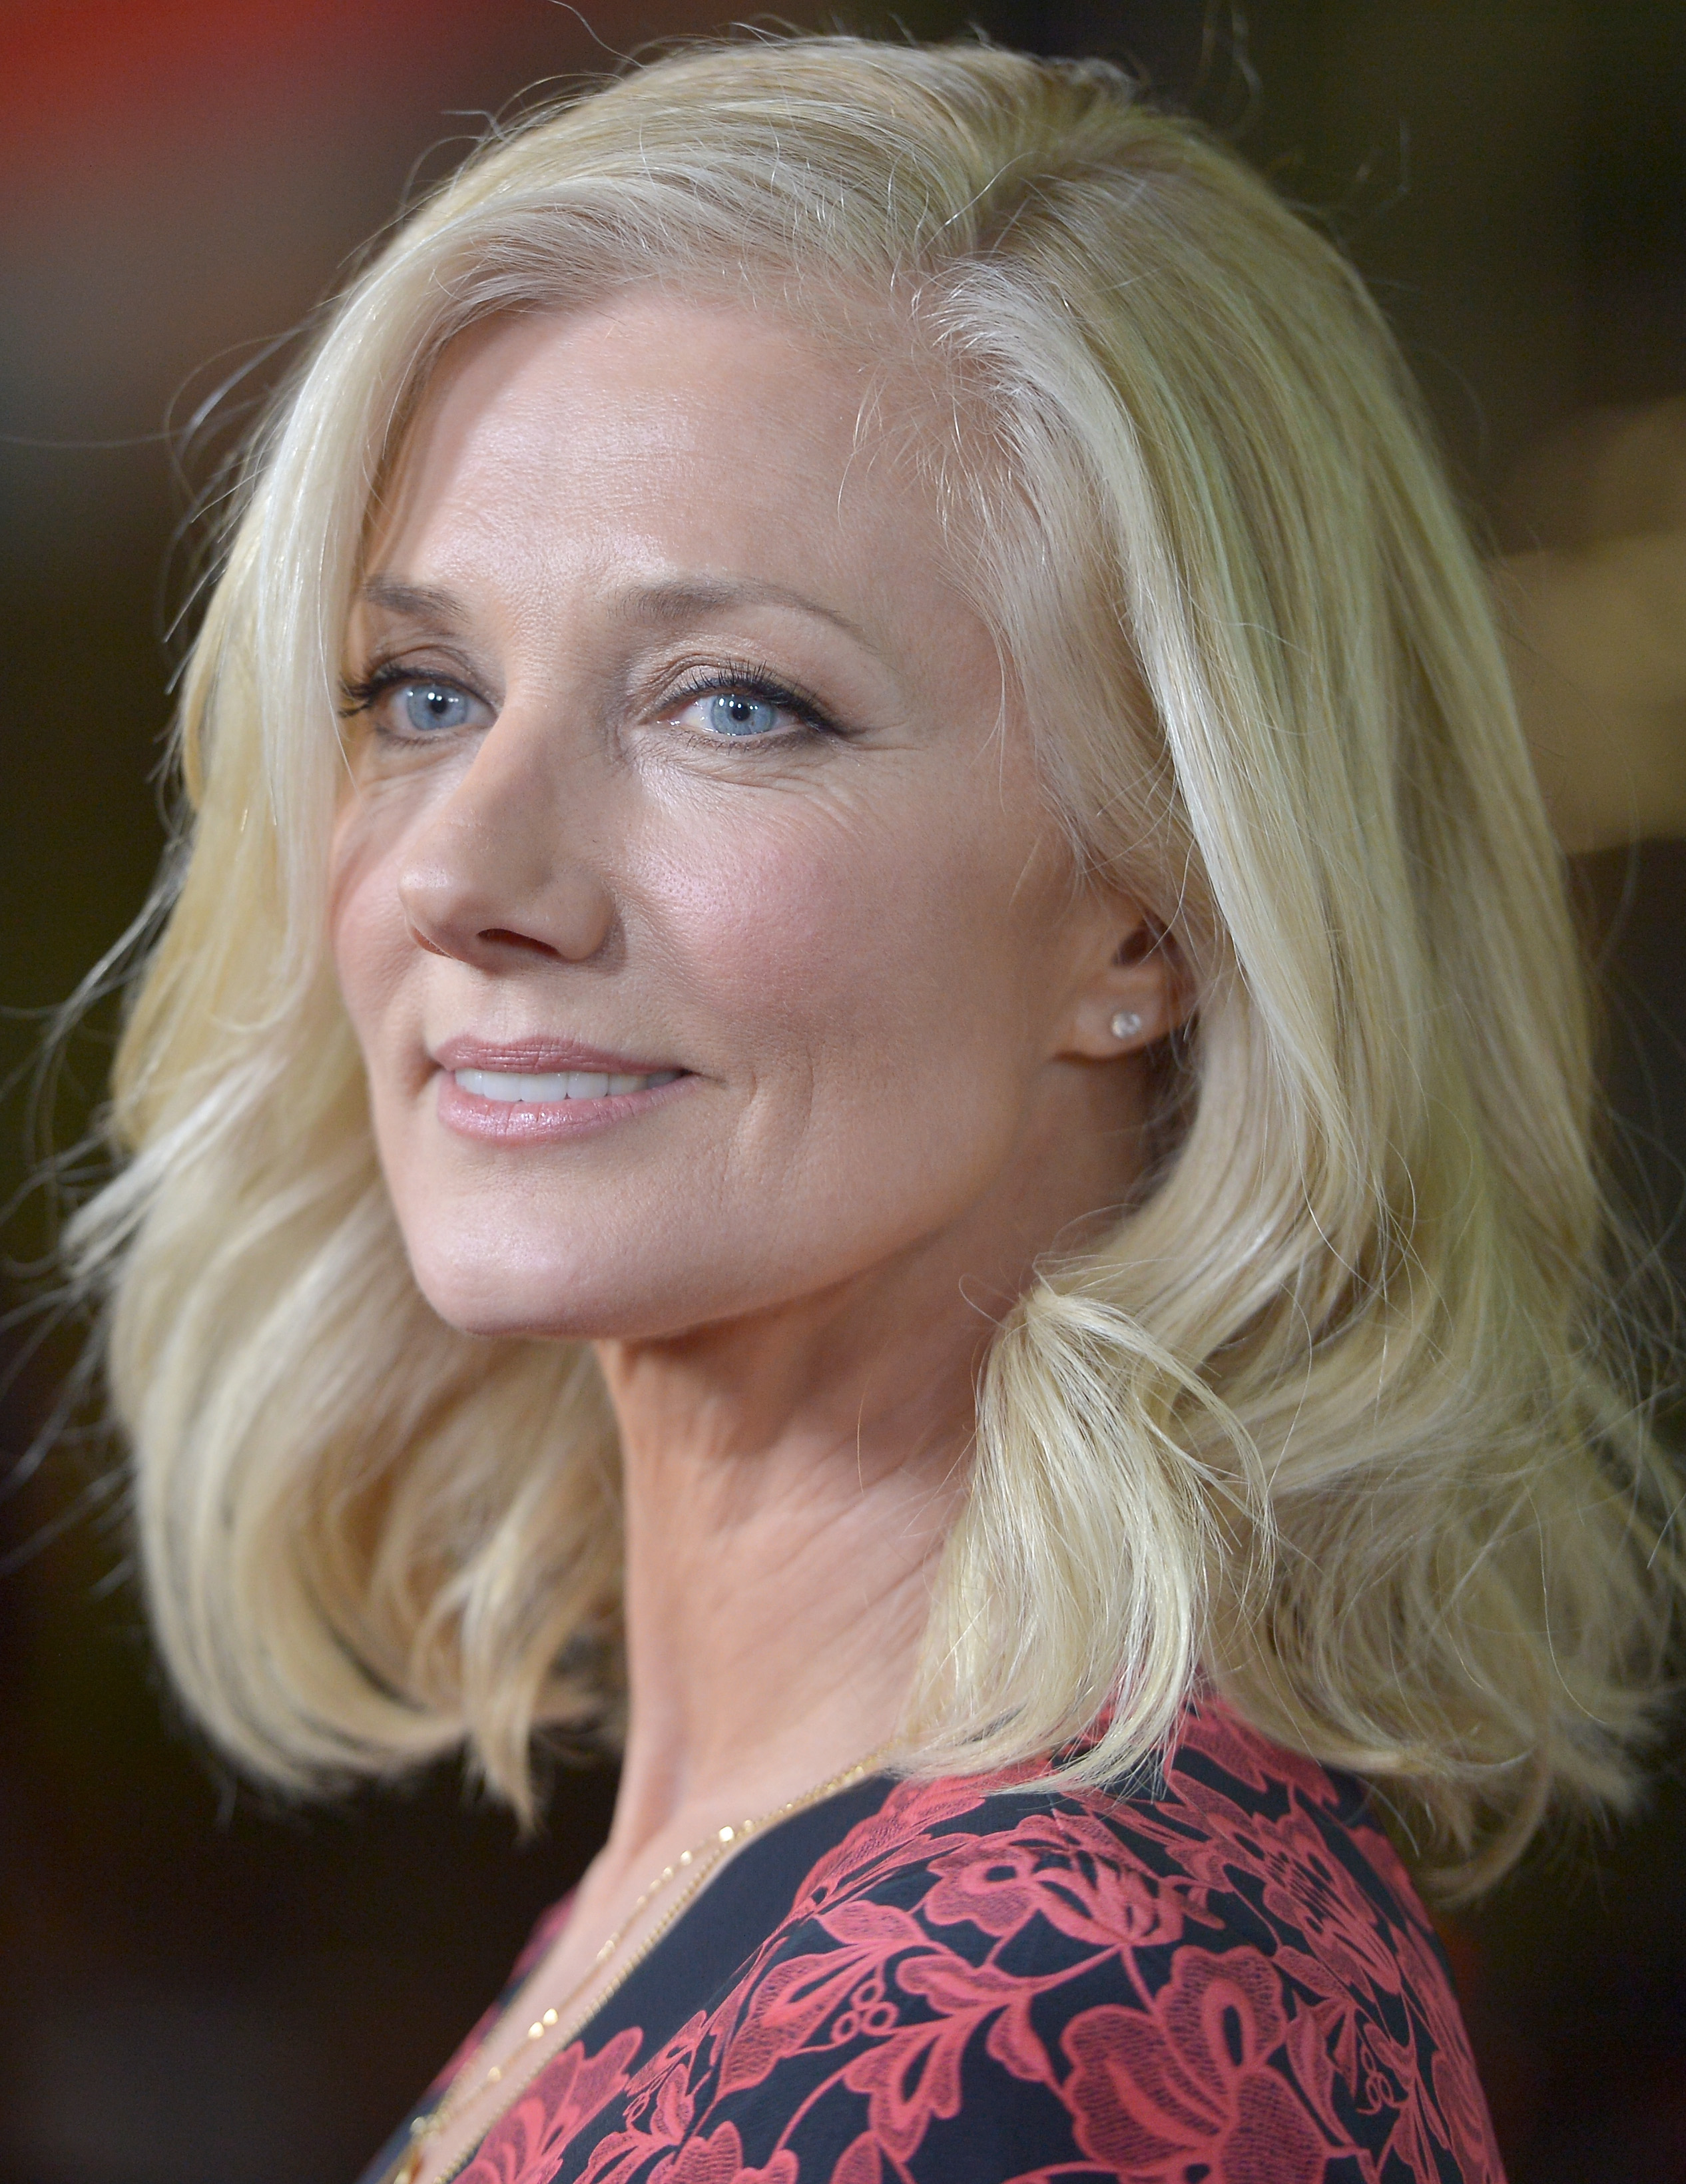 joely richardson, images, image, wallpaper, photos, photo, photograph, gall...